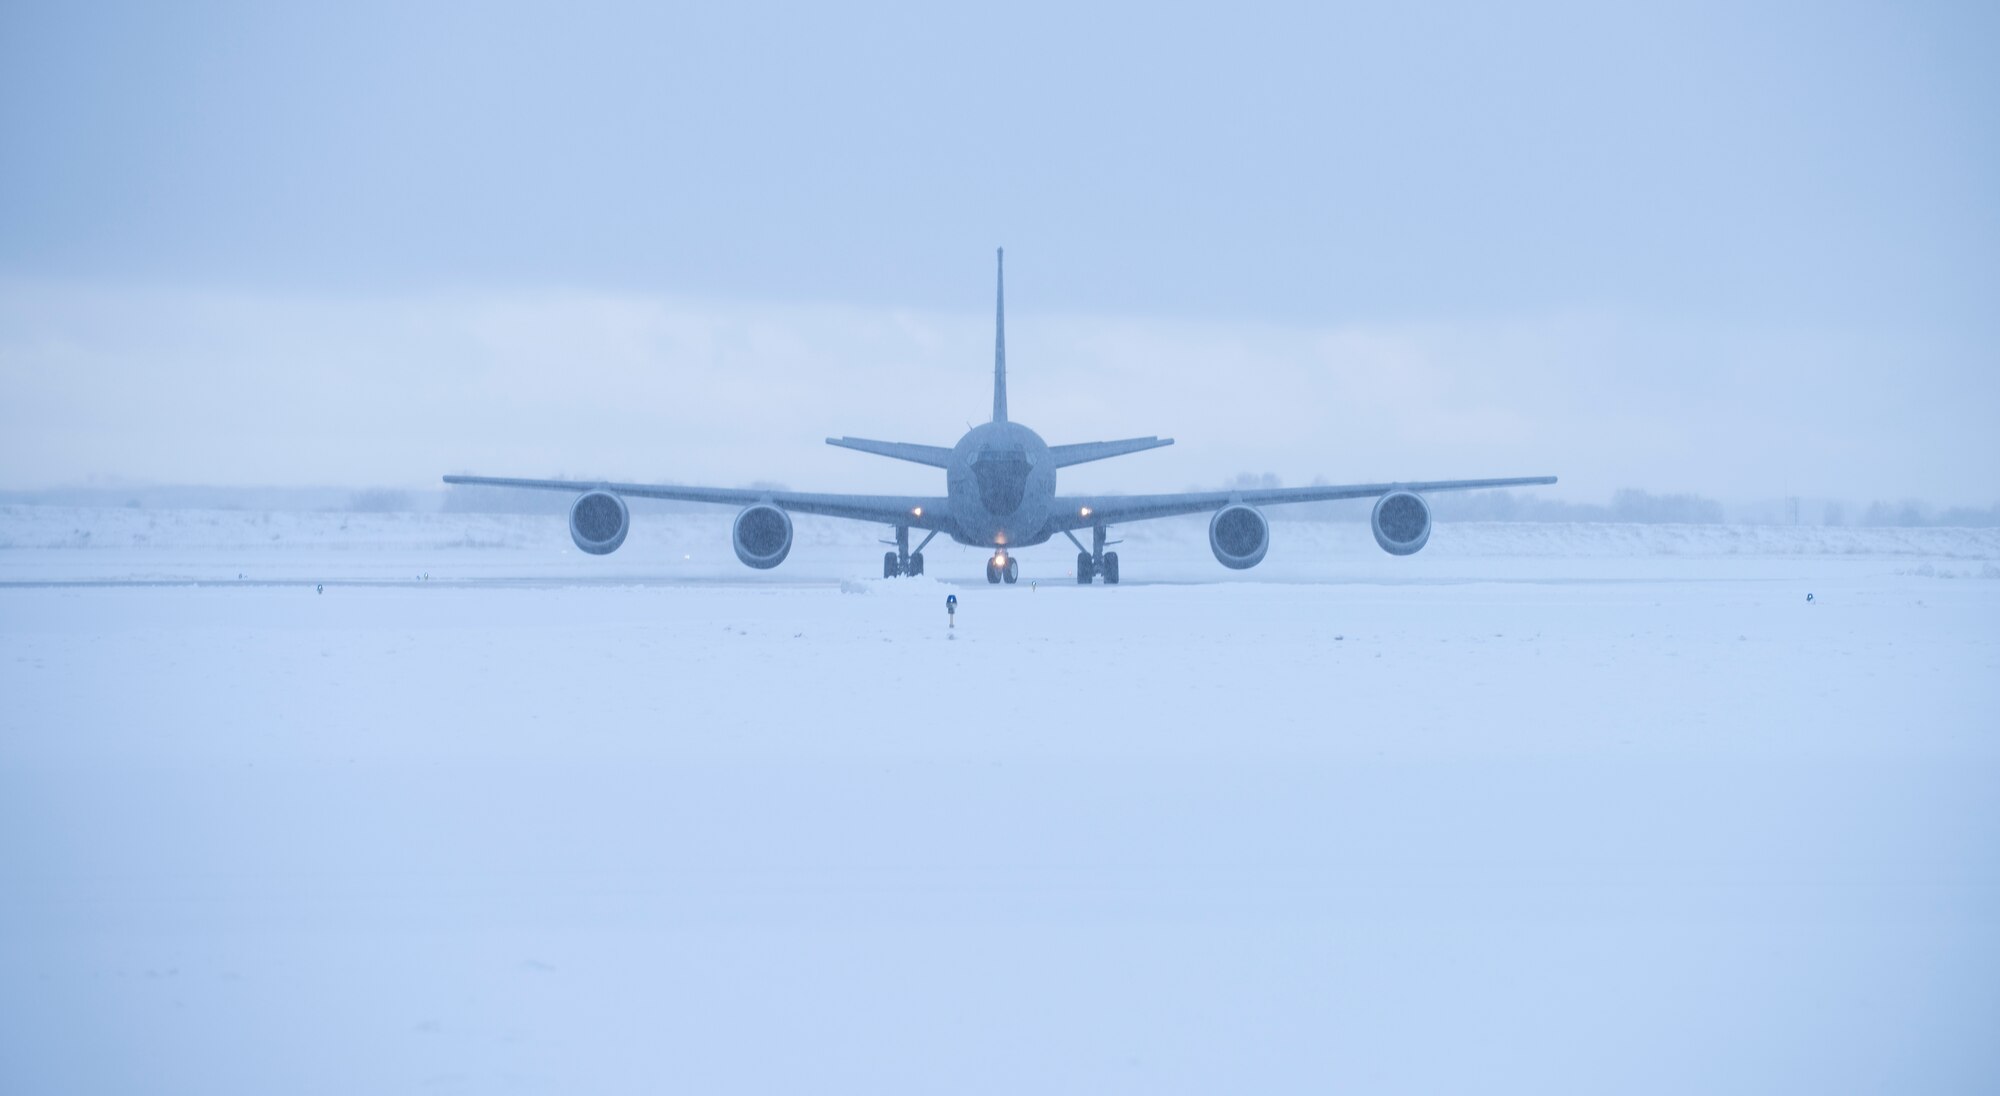 Military refueling taxis on snowy runway.